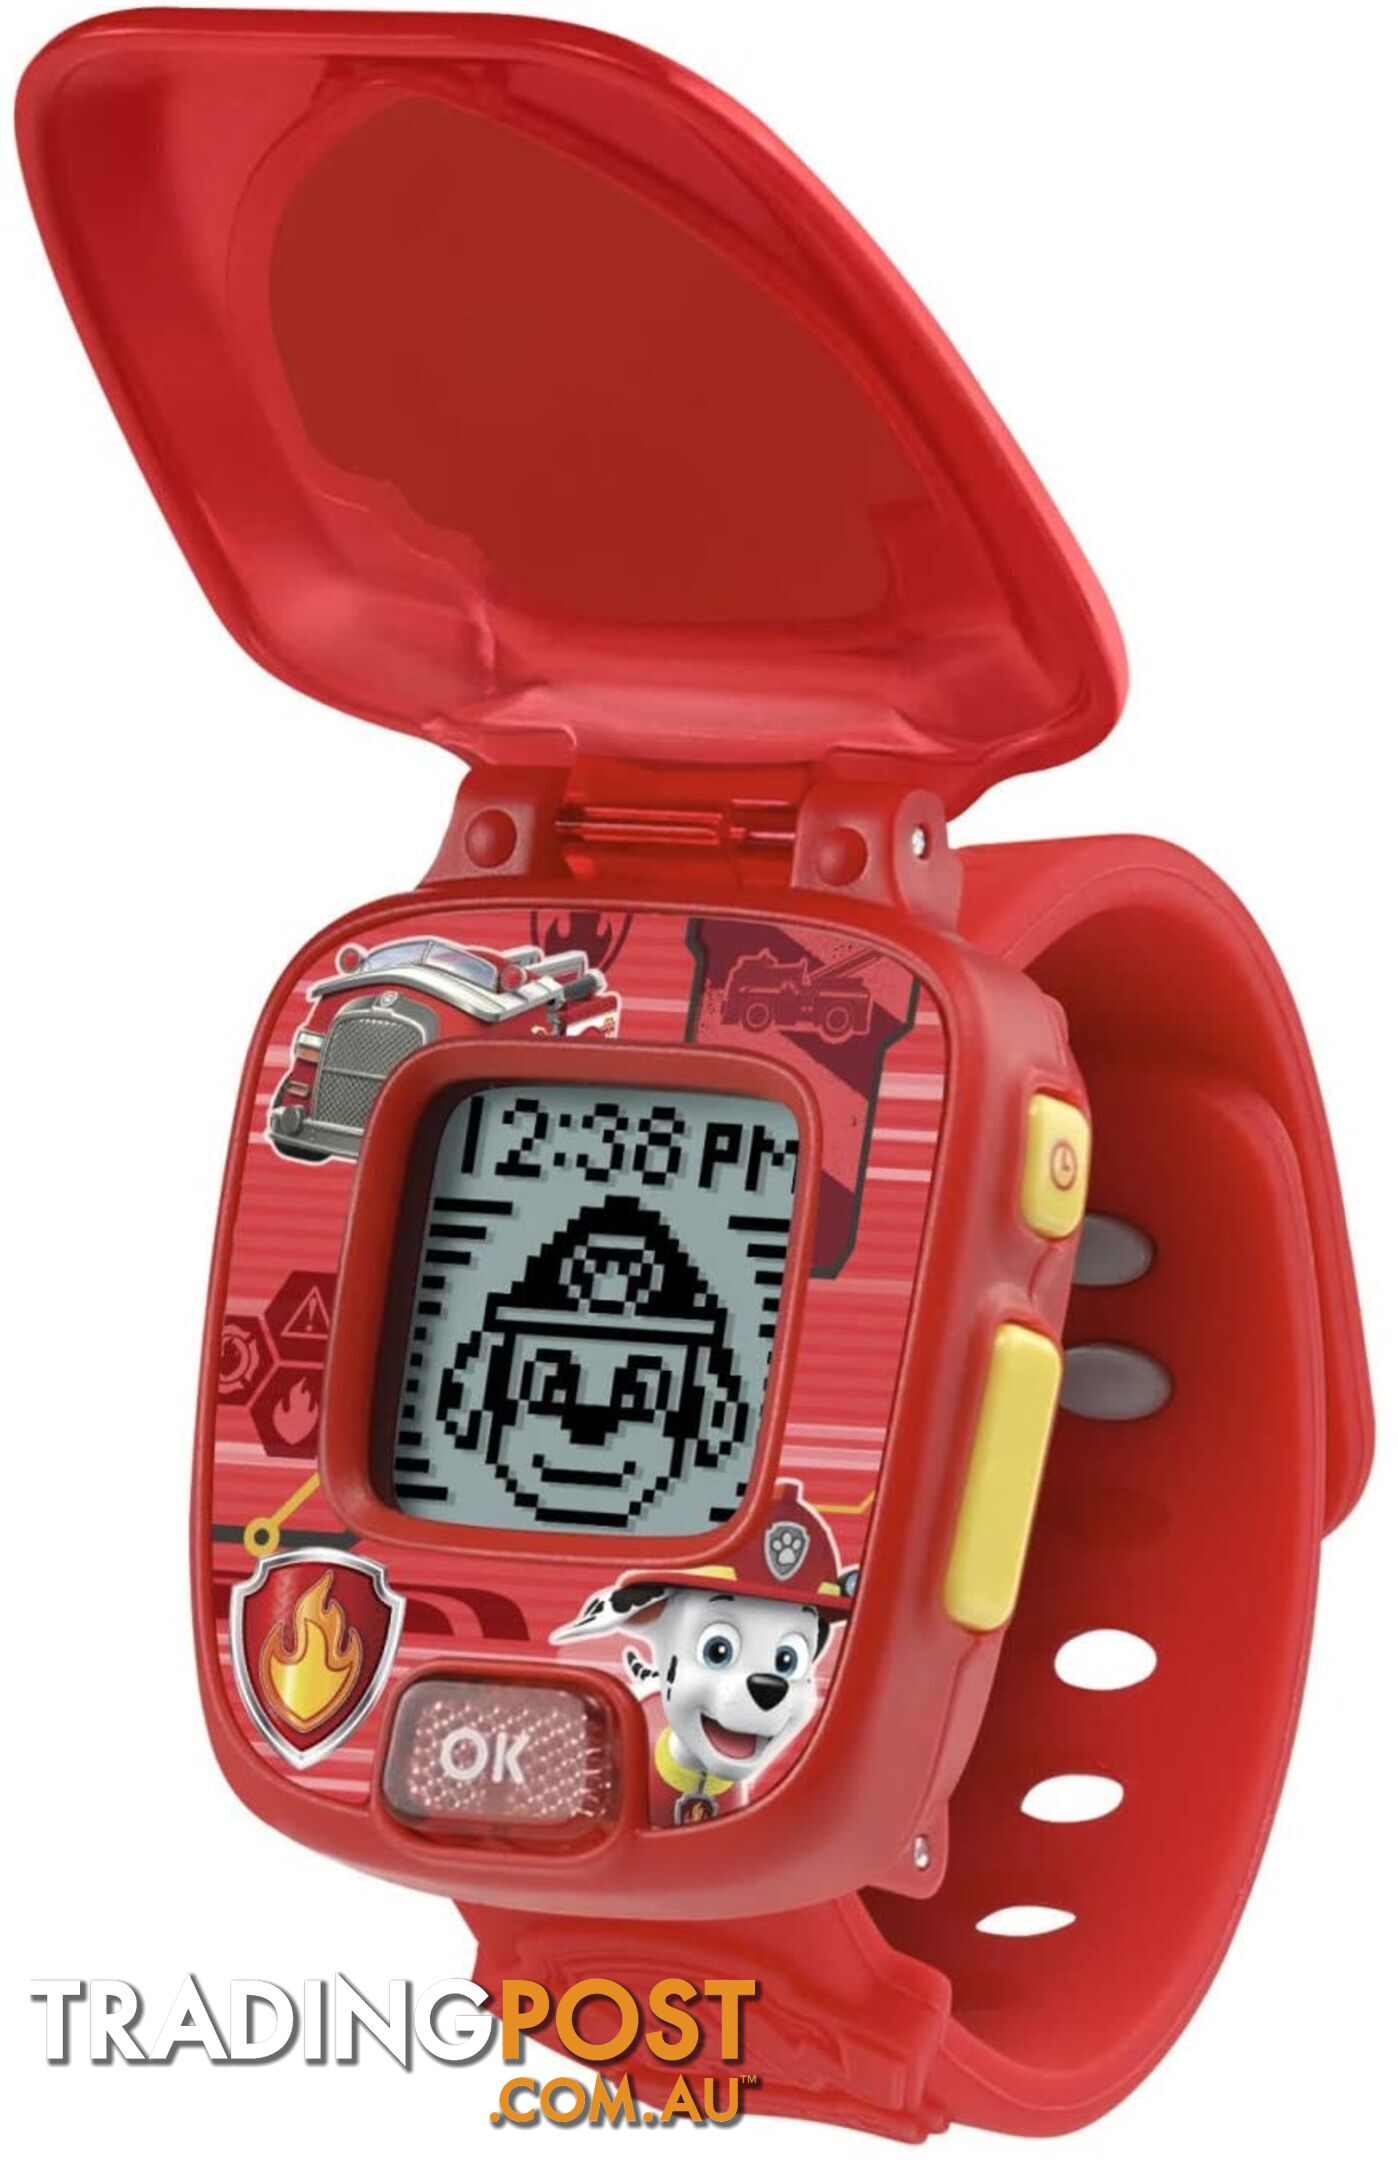 Paw Patrol - Marshall Learning Watch Red Vtech Tn80199560 - 3417761995600